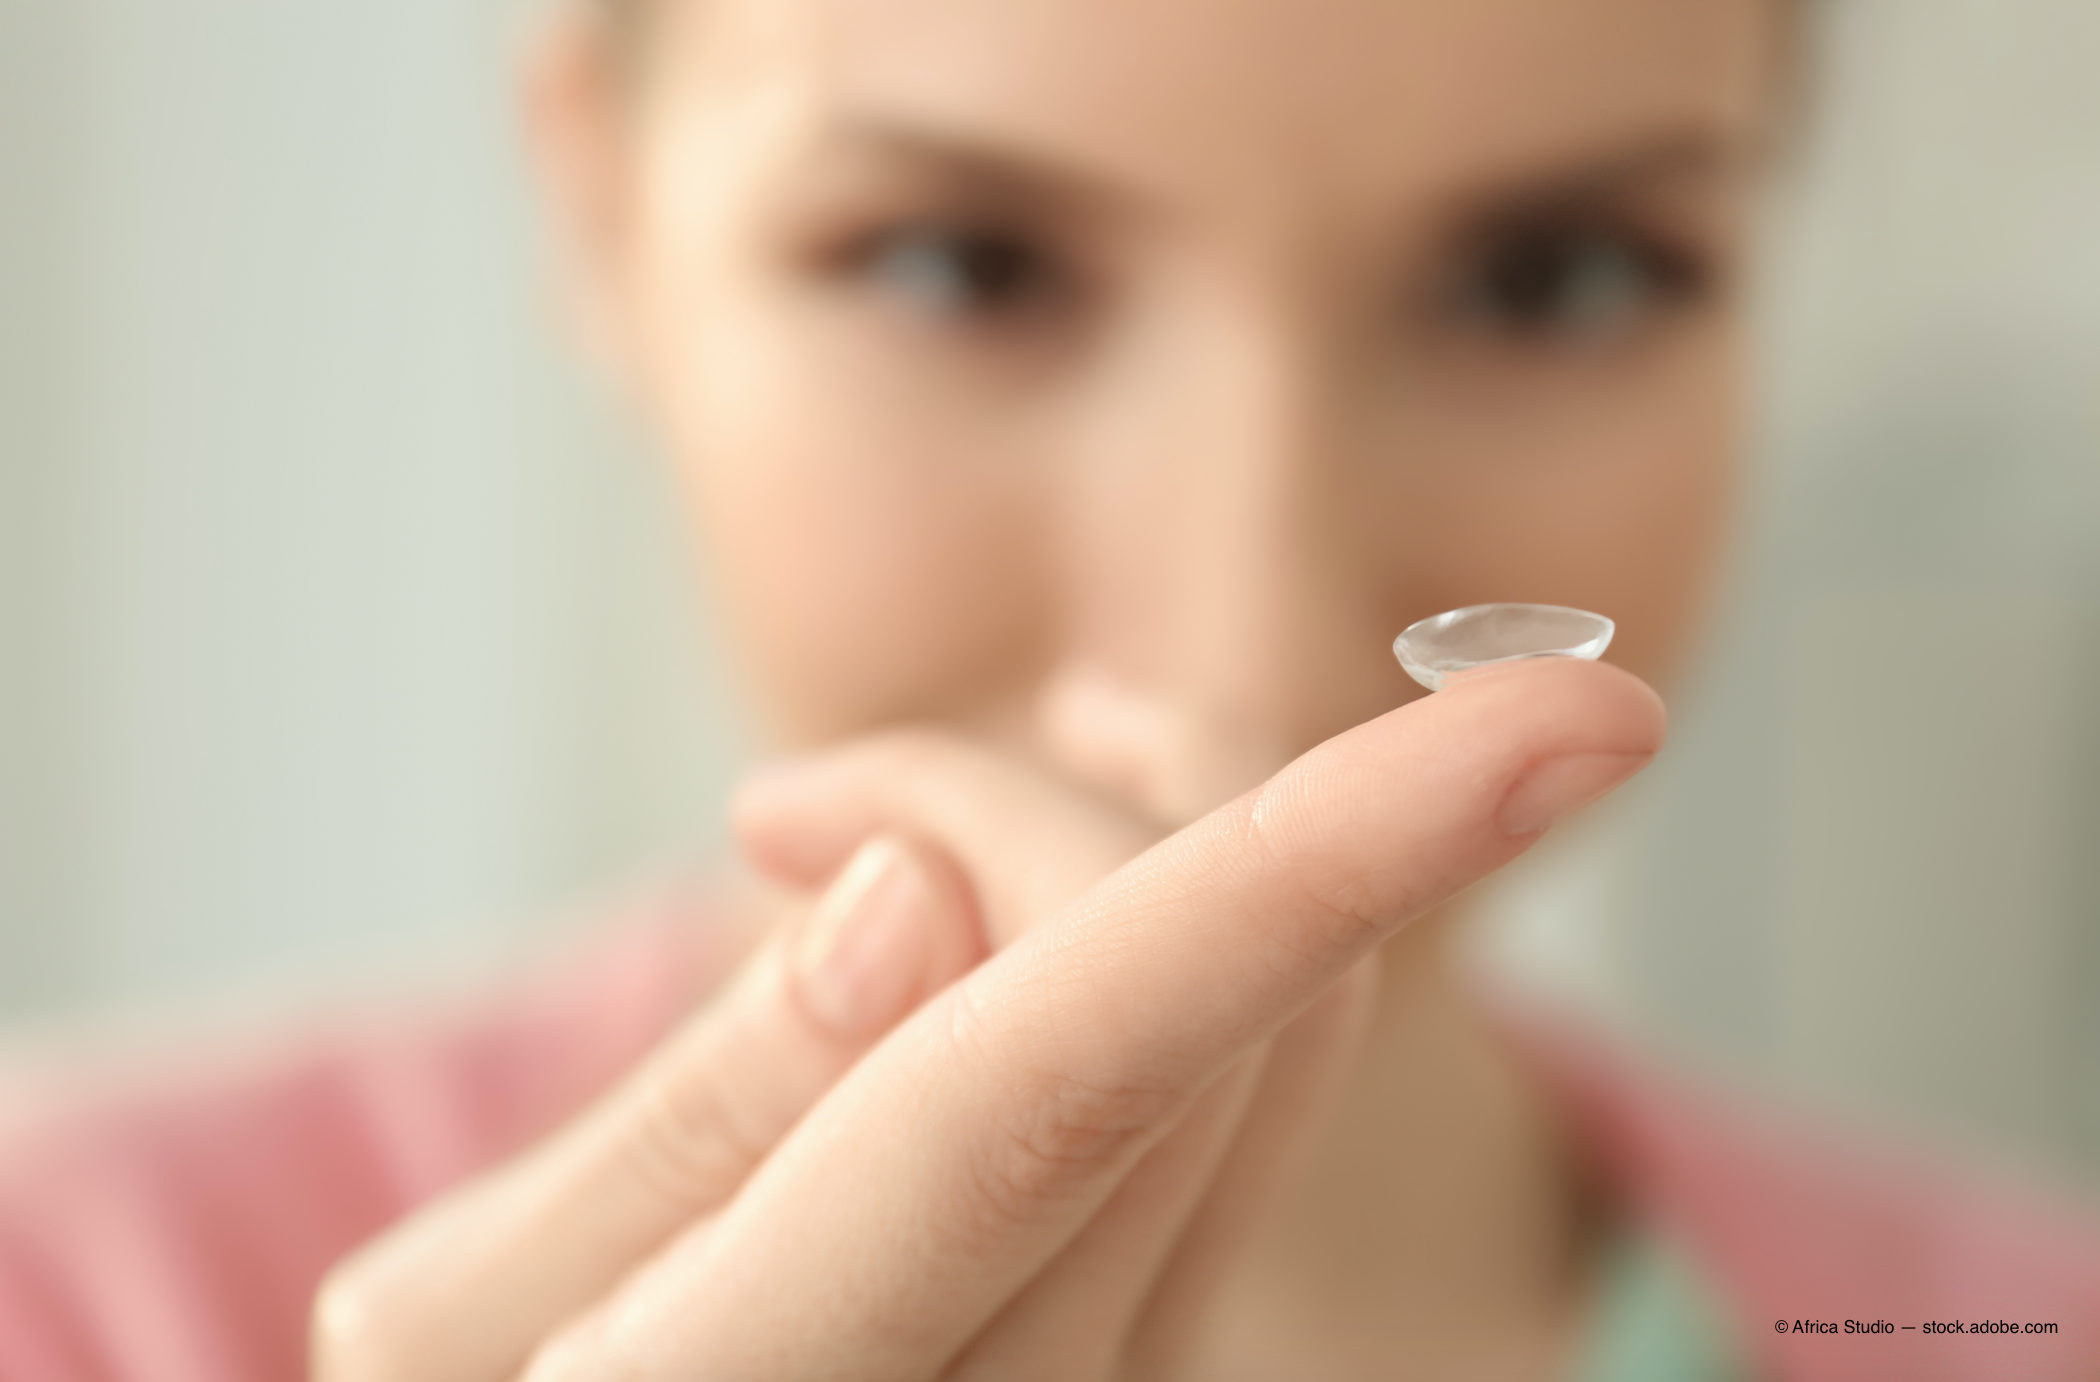 4 vision-related causes of contact lens discomfort